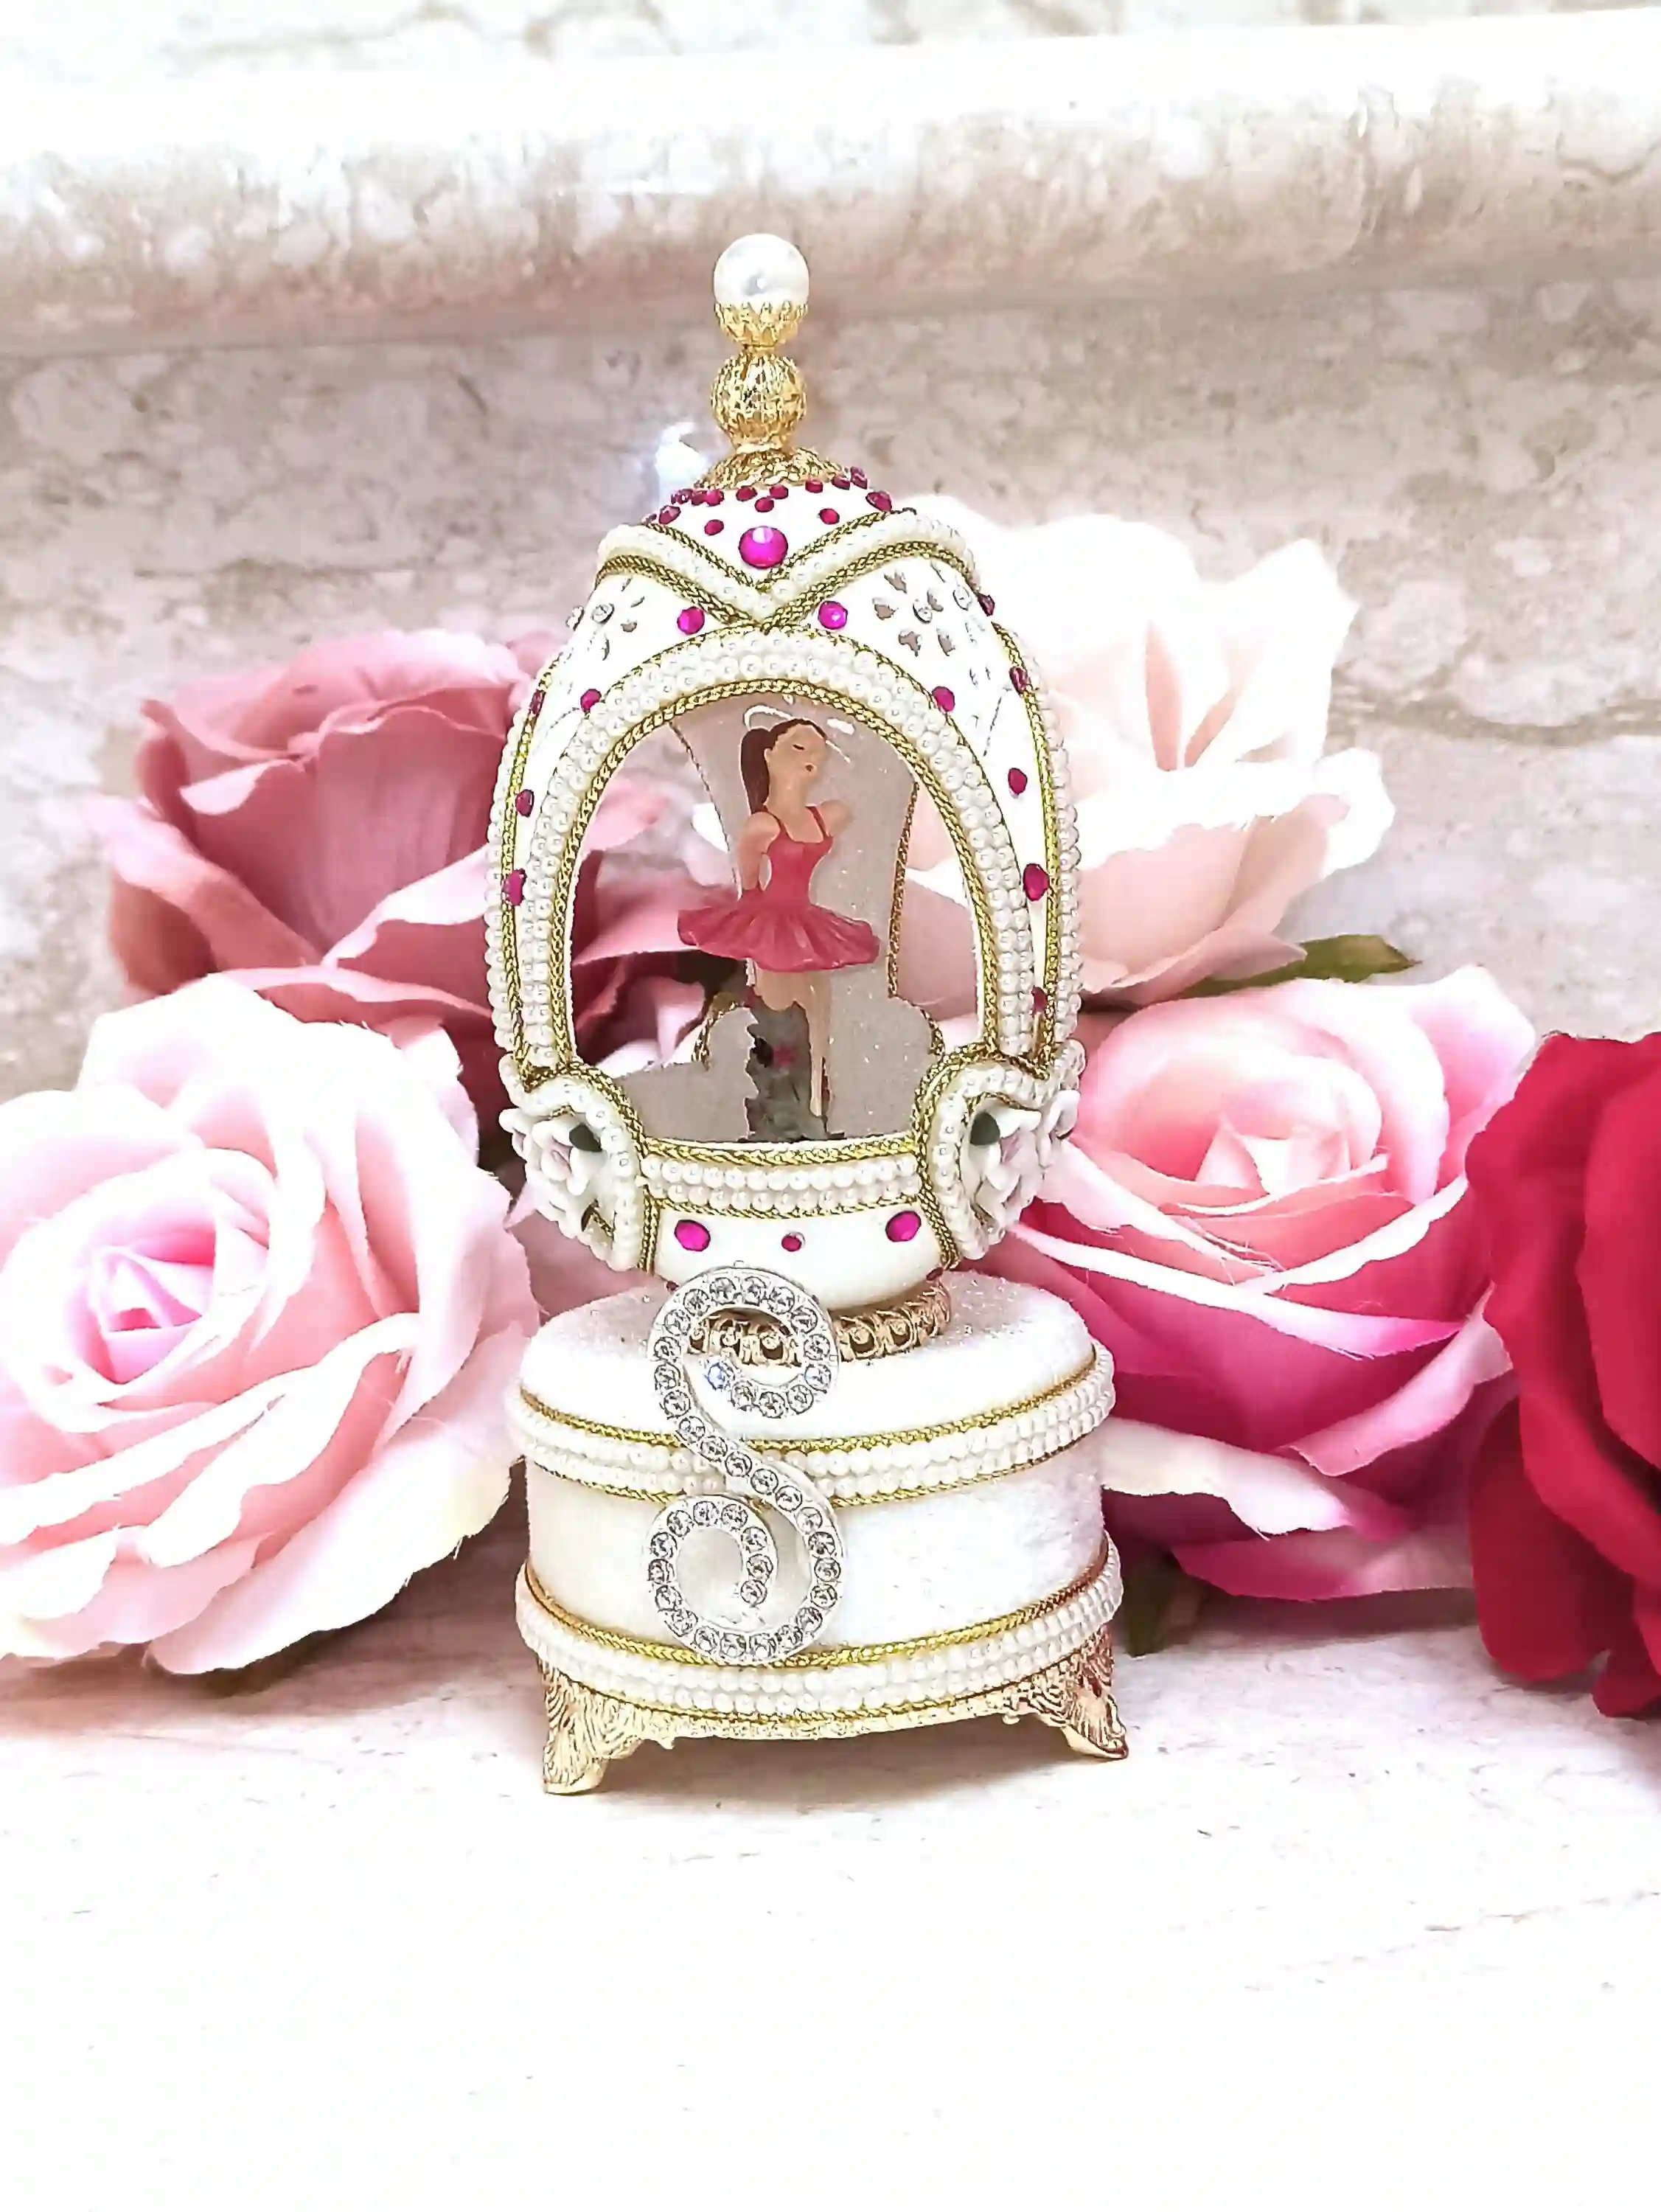 Personalized Gift for her Faberge egg Ornament Custom Figurine HAND Carved Natural Egg Faberge Music box Monogram 24k GOLD HANDMADE present 